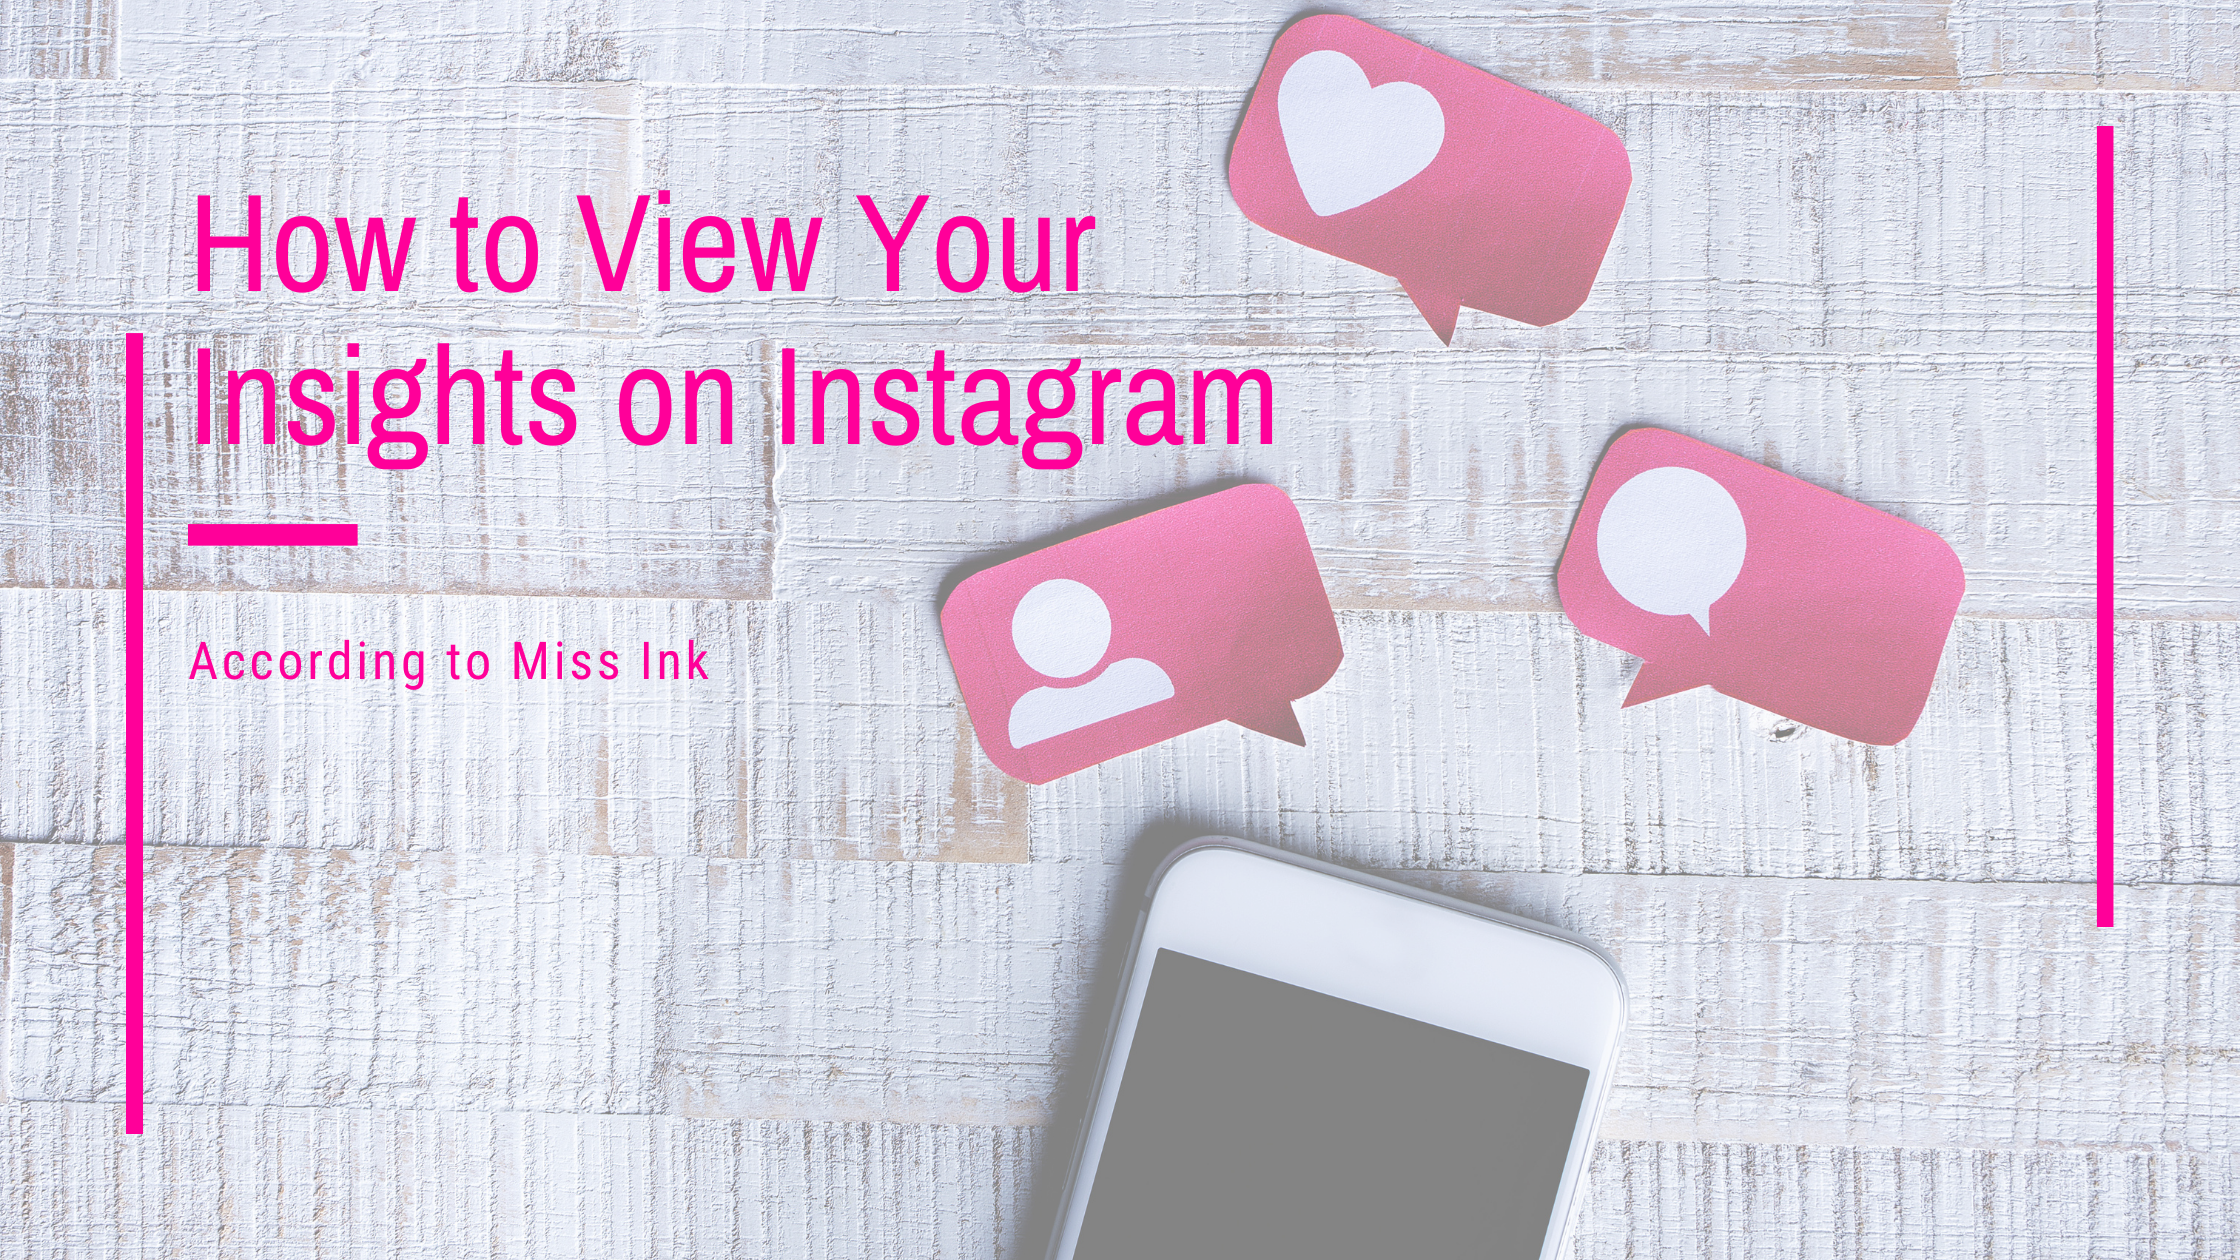 How to View Your Insights on Instagram